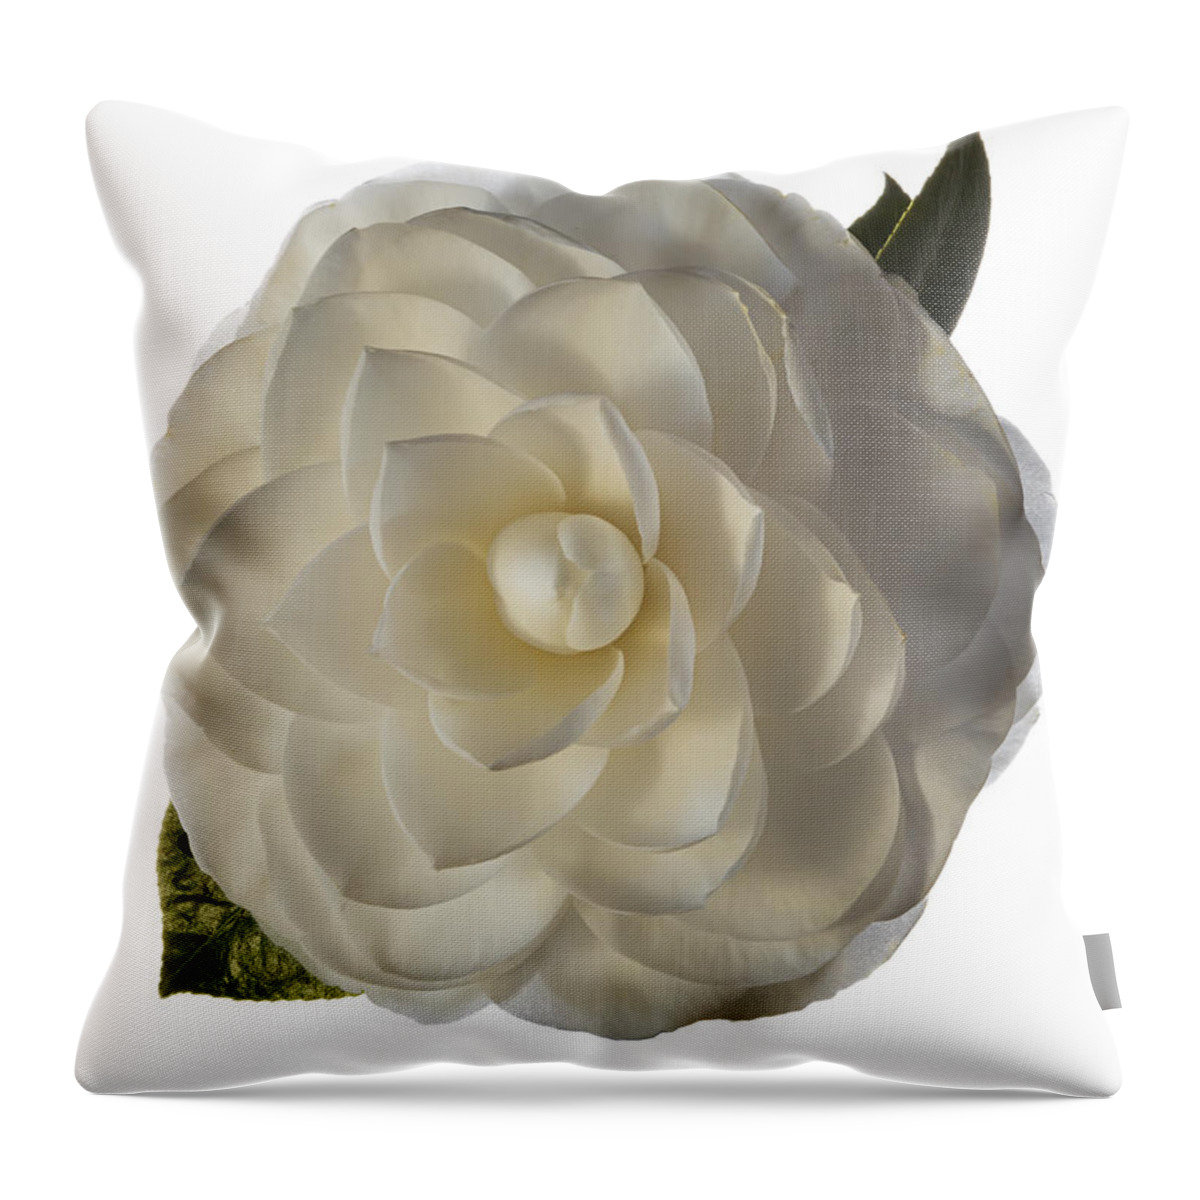 Flower Throw Pillow featuring the photograph Fancy White Camellia by Endre Balogh